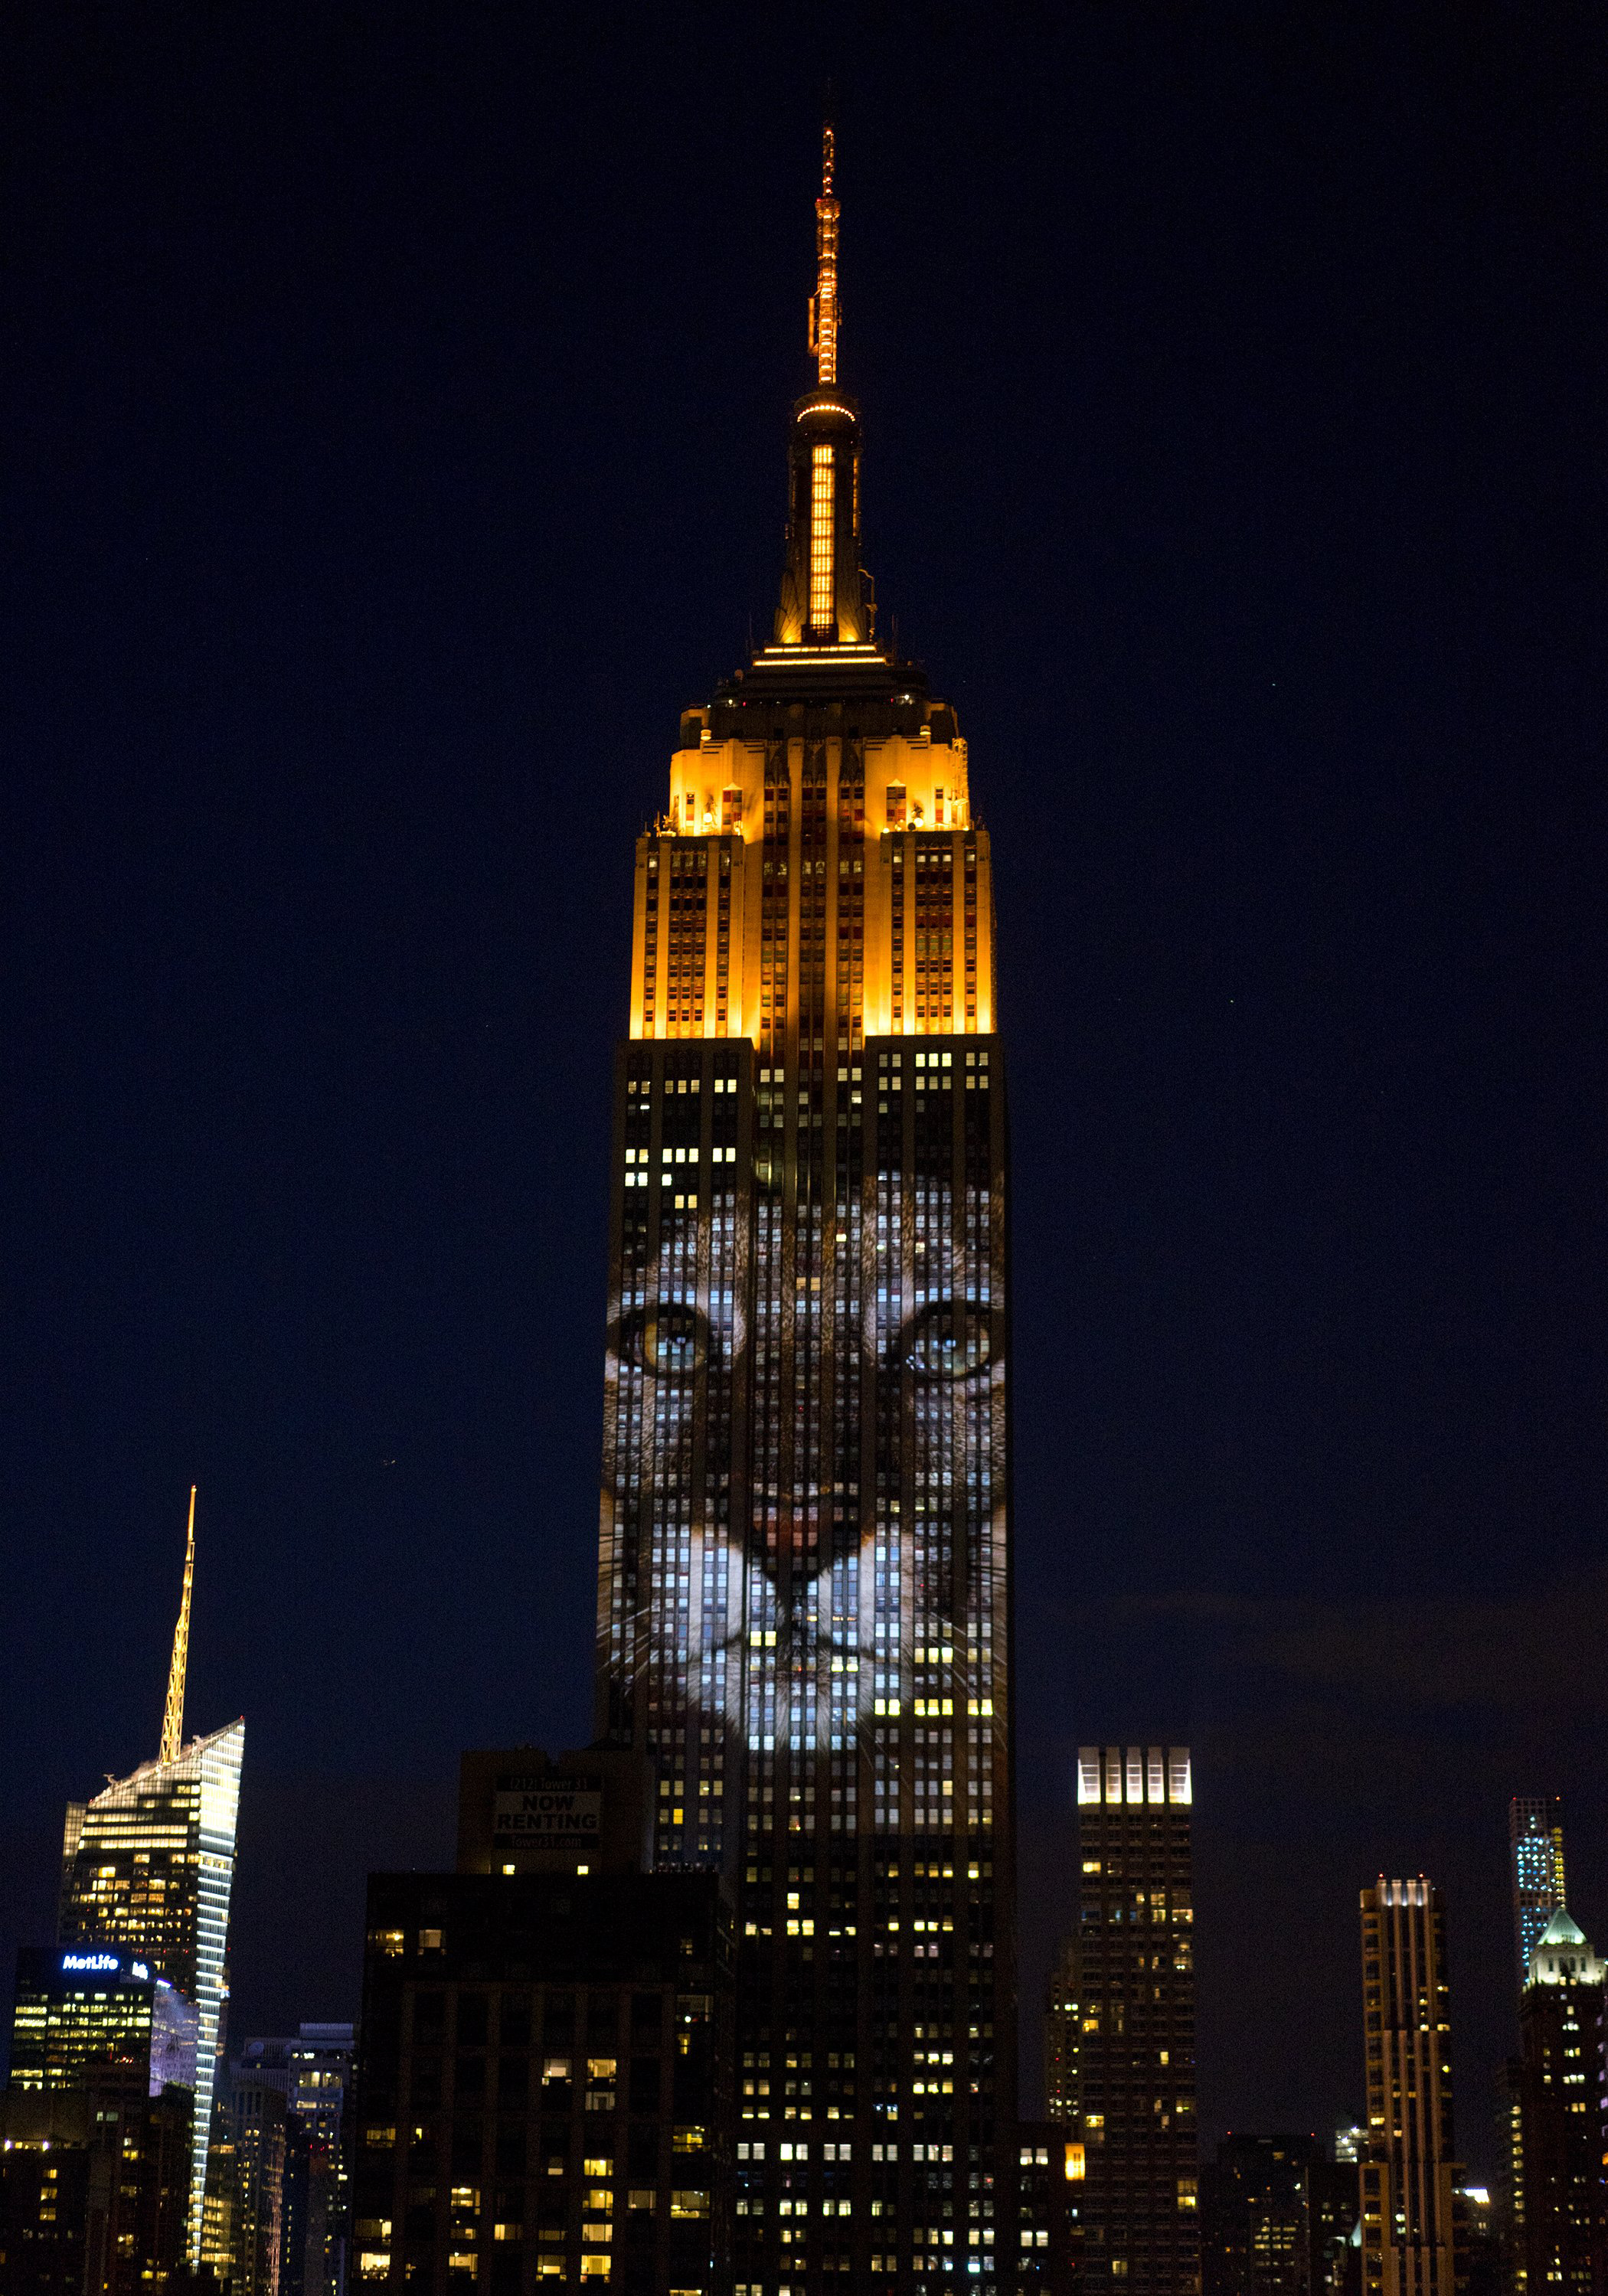 Large images of endangered species are projected on the south facade of The Empire State Building on Aug. 1, 2015, in New York City.